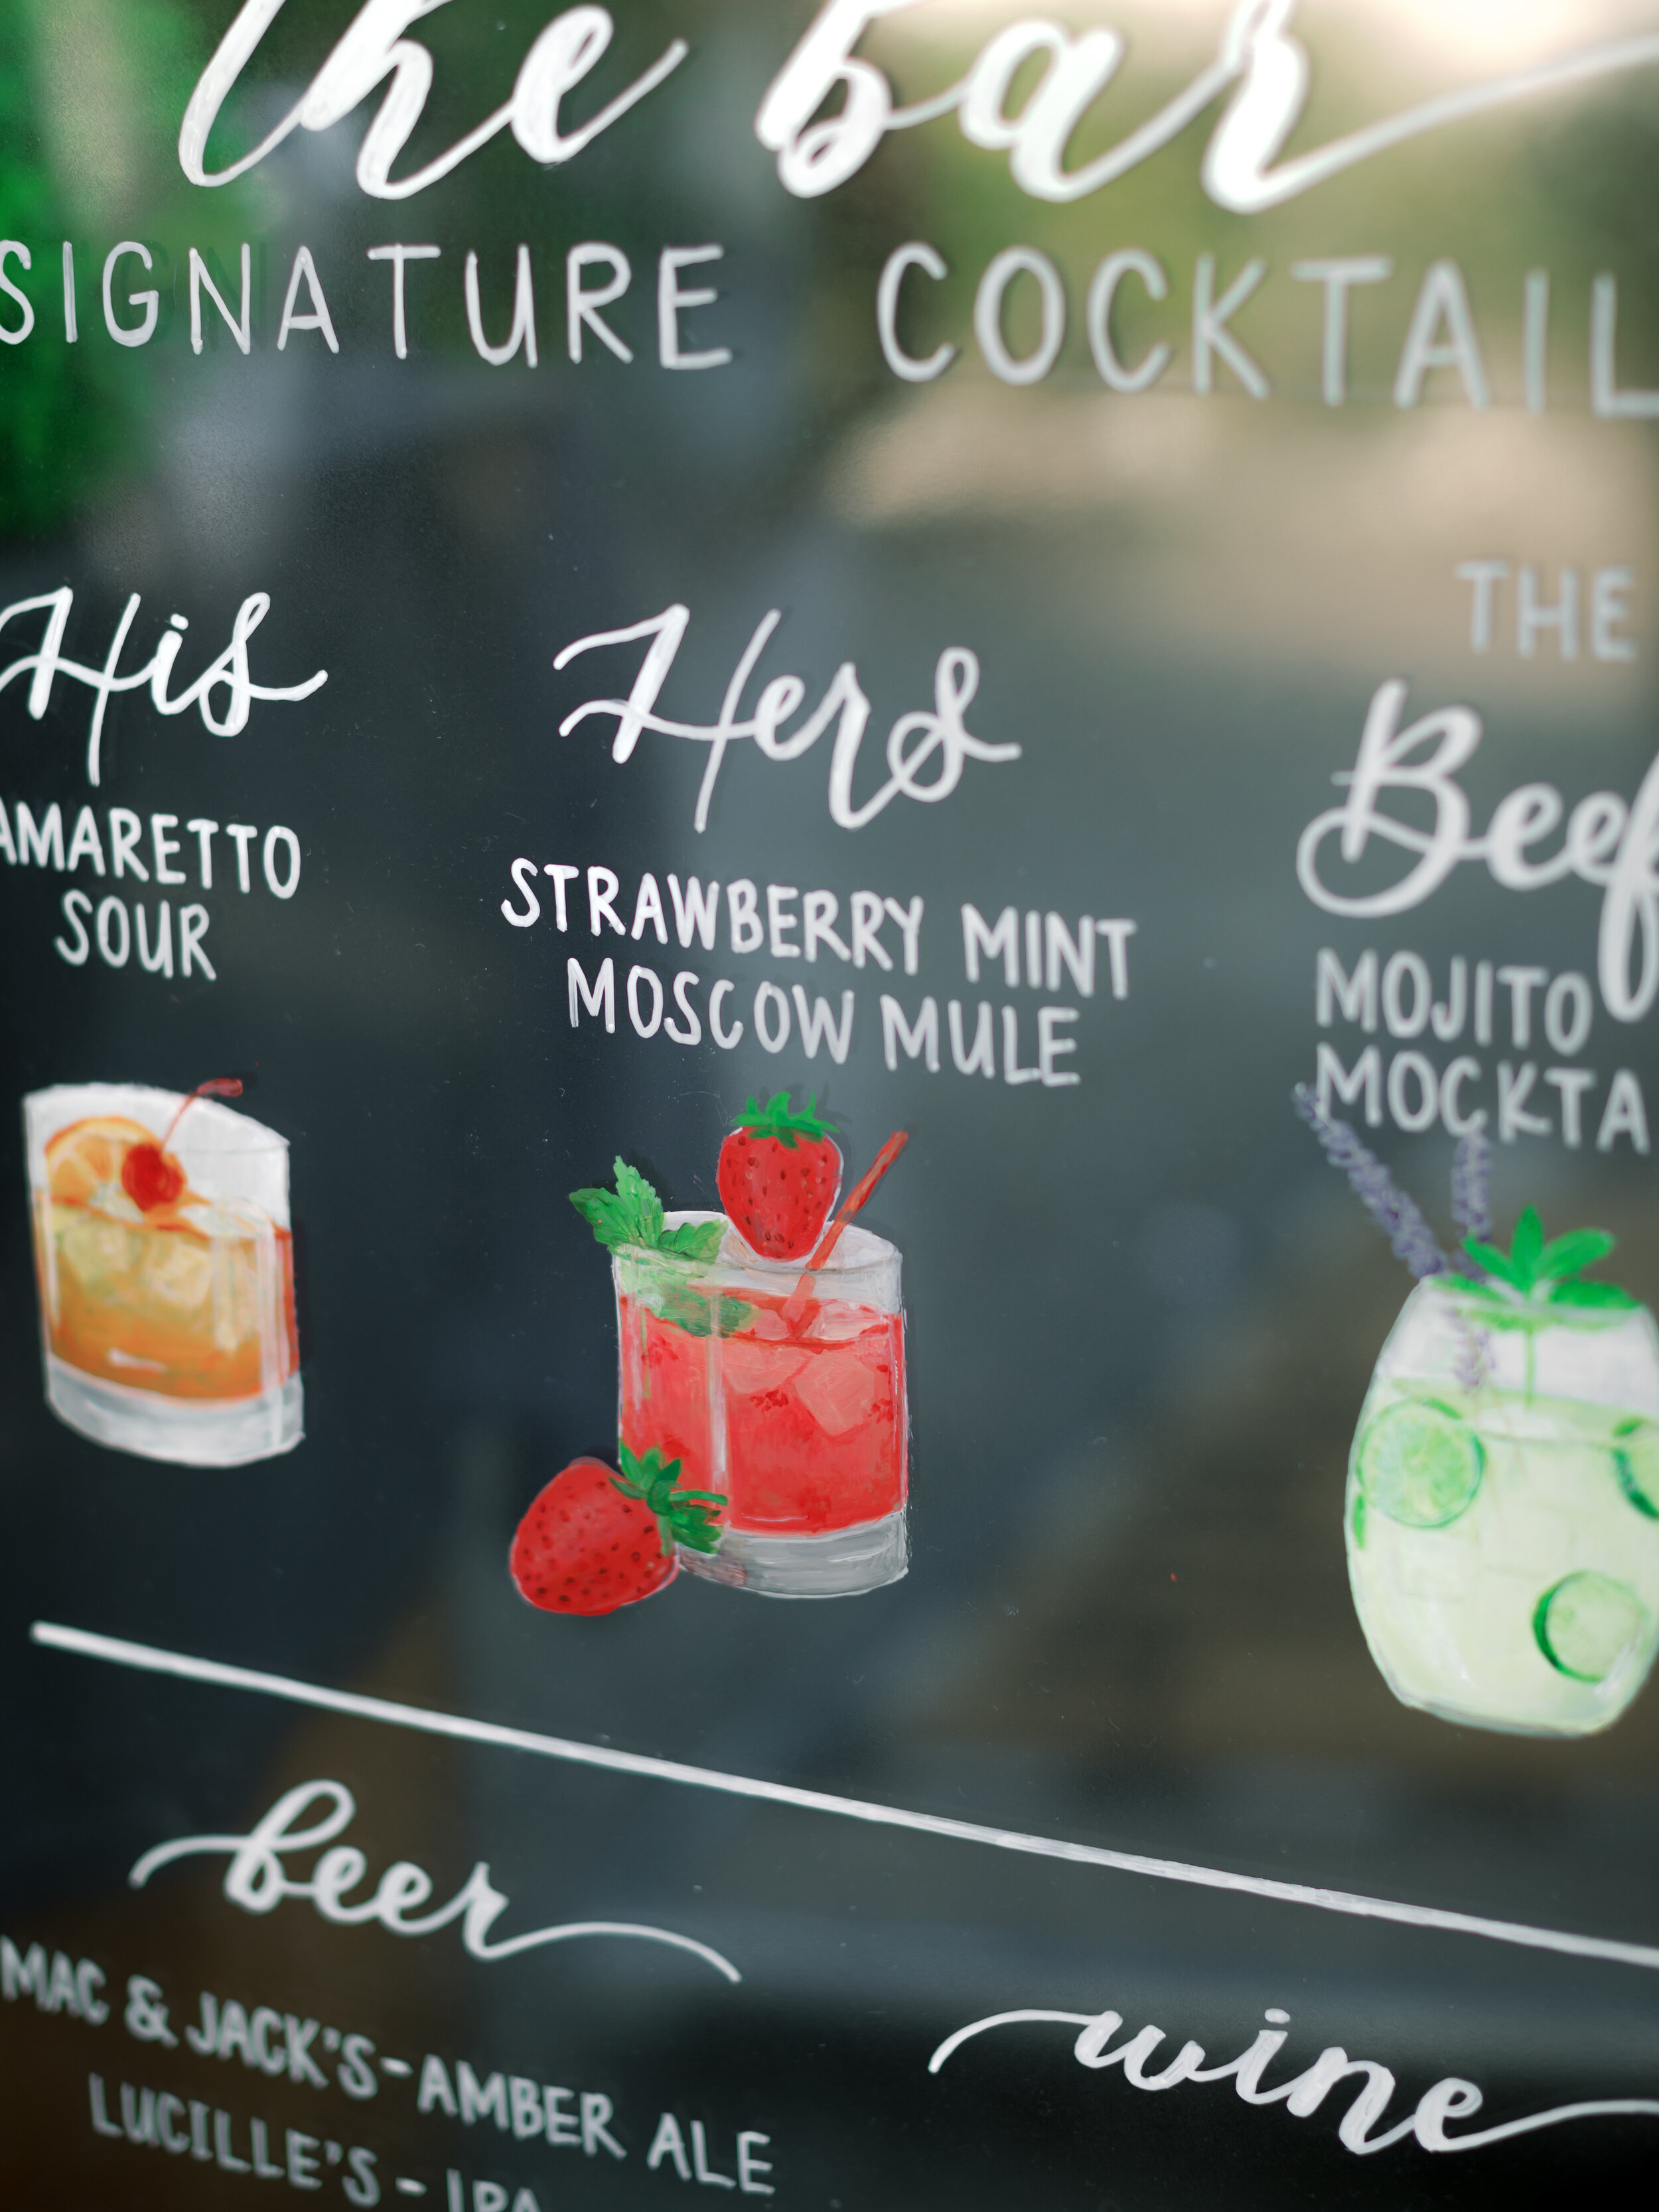 custom-made-bar-sign-wedding-cocktails-pacific-engagements-wedding-planning-ideas